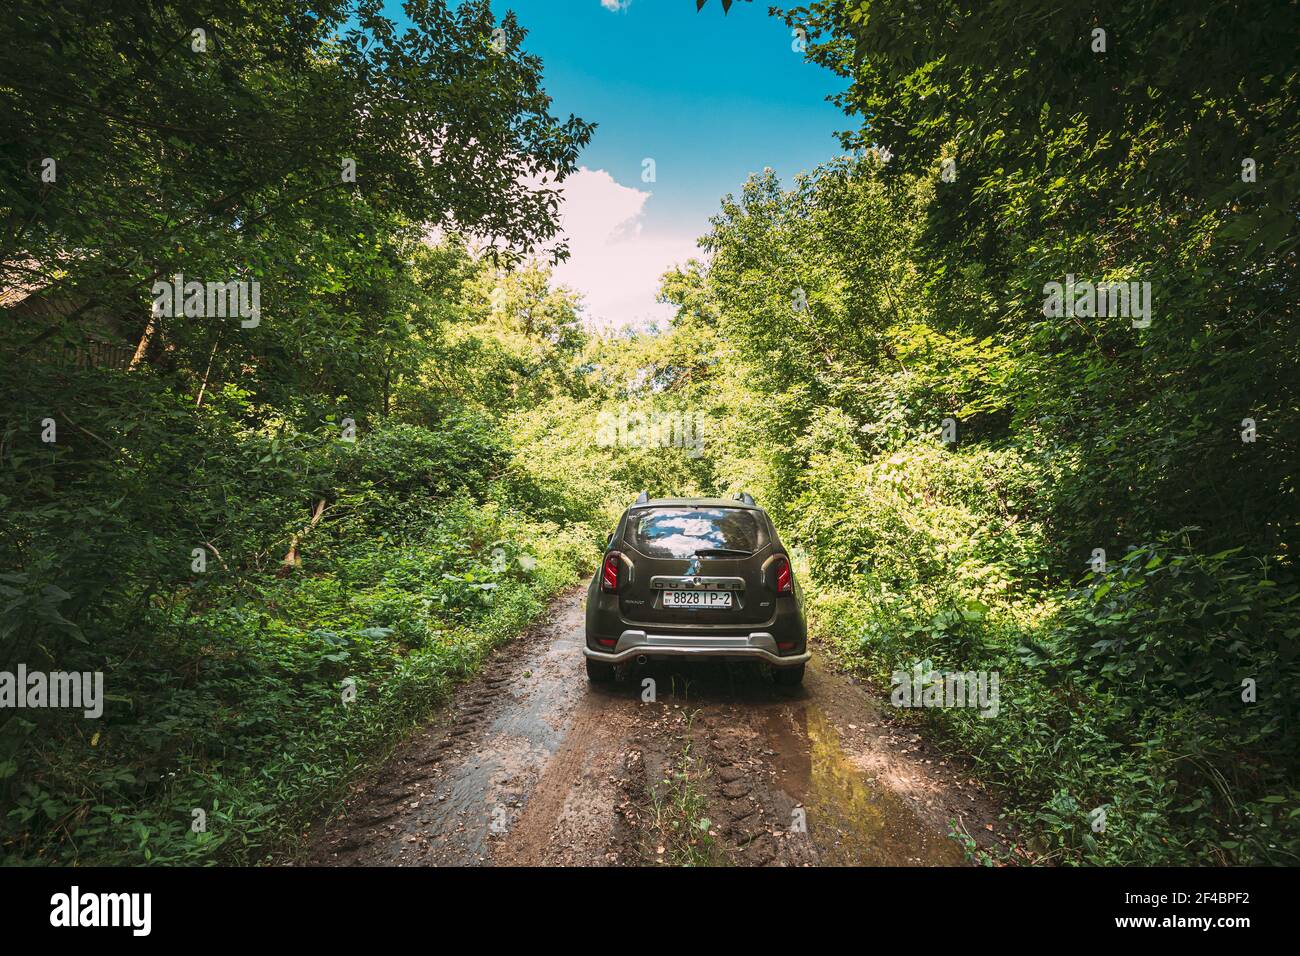 Berezki, Belarus. Car Drives Along The Village Street With Abandoned House Overgrown With Trees And Vegetation In Chernobyl Resettlement Zone Stock Photo